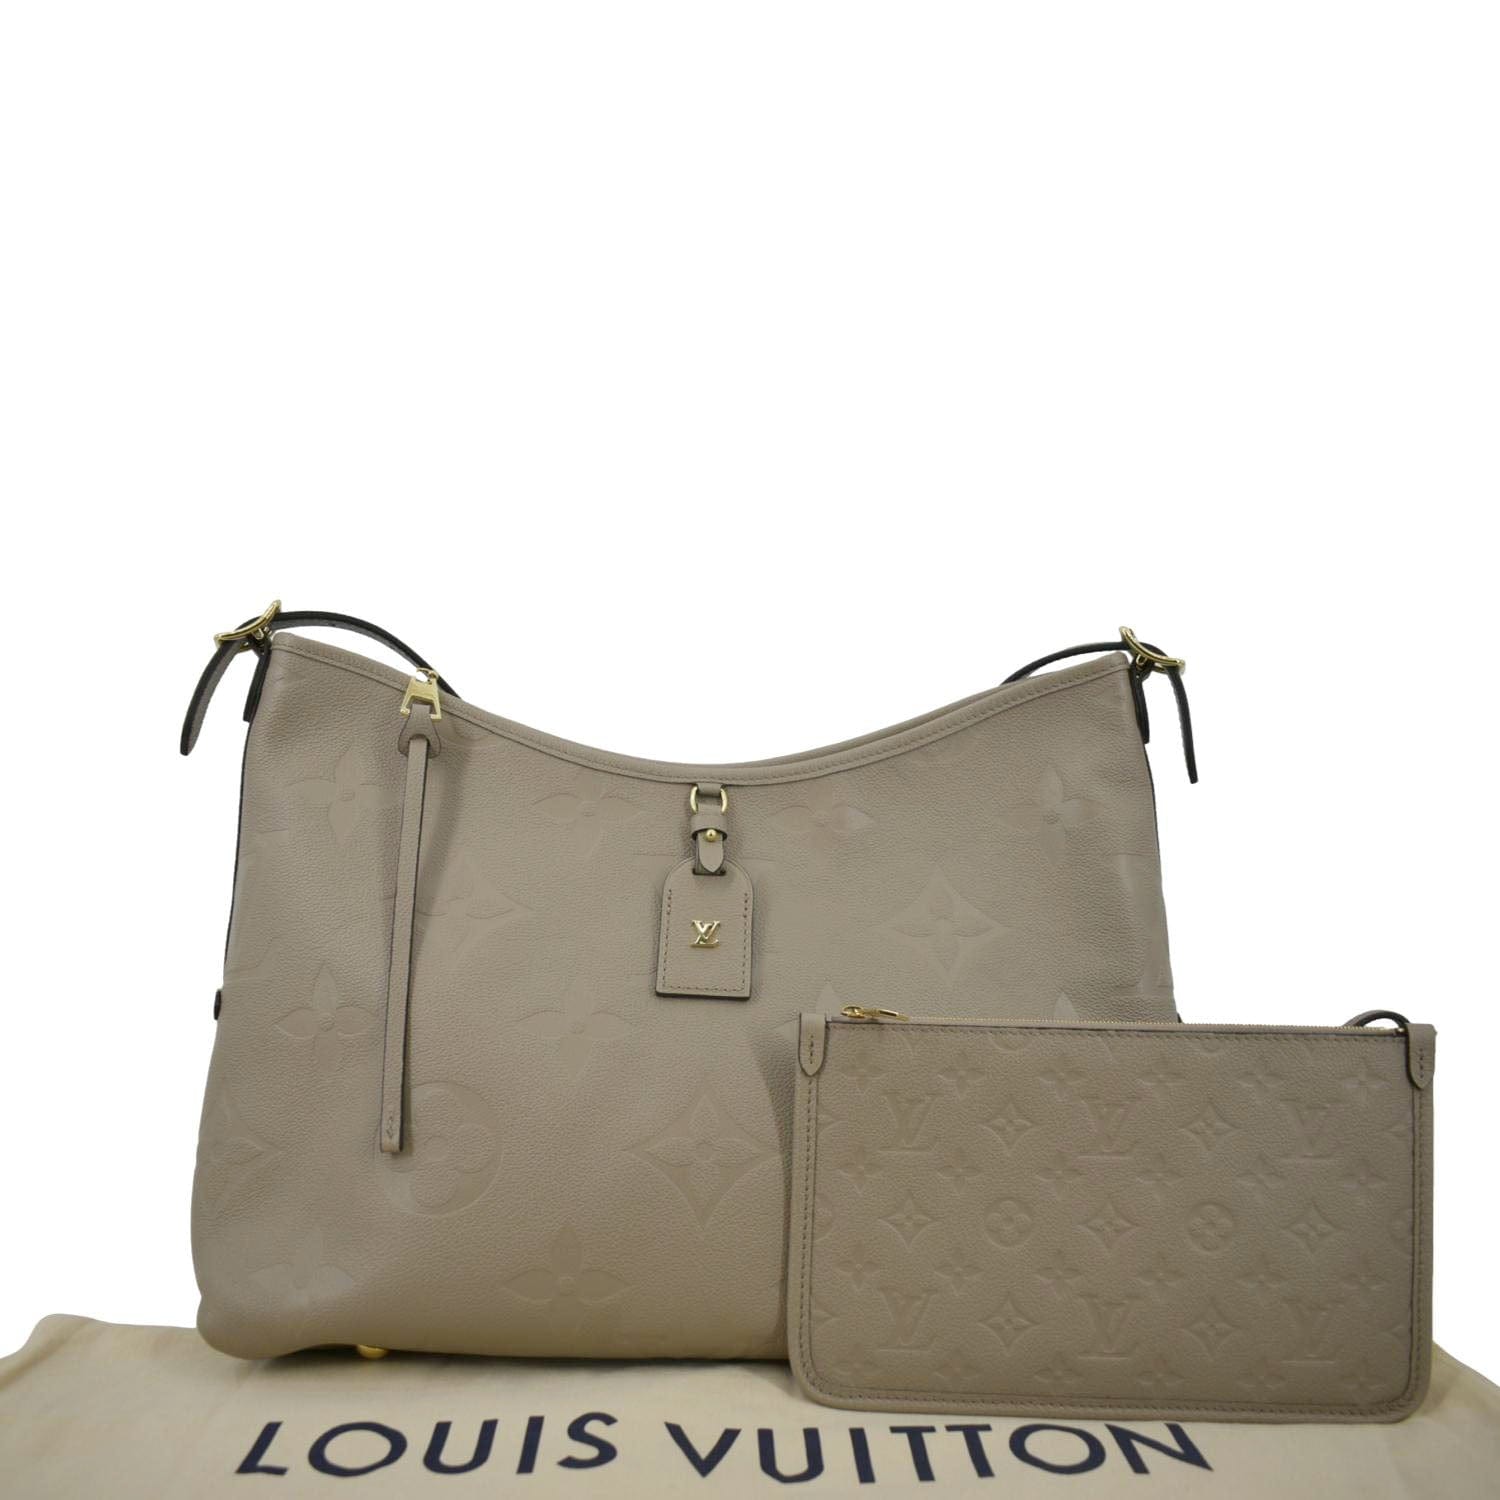 Louis Vuitton Carryall MM- What do you think about this crossbody